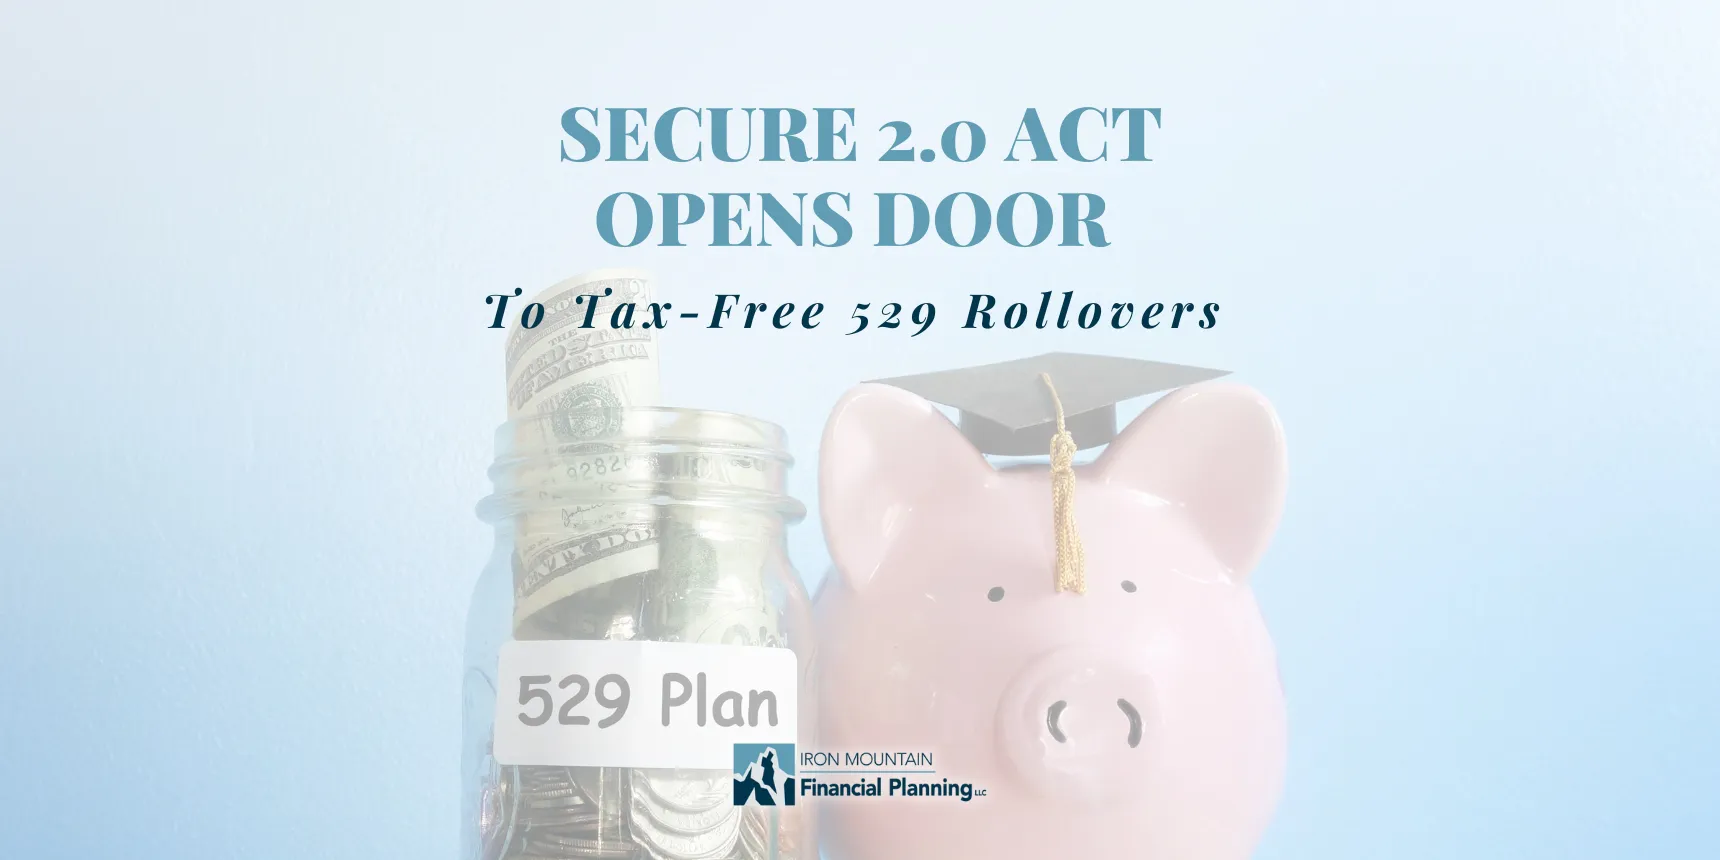 Secure Act Rollovers Now Include tax-free 529 Rollovers